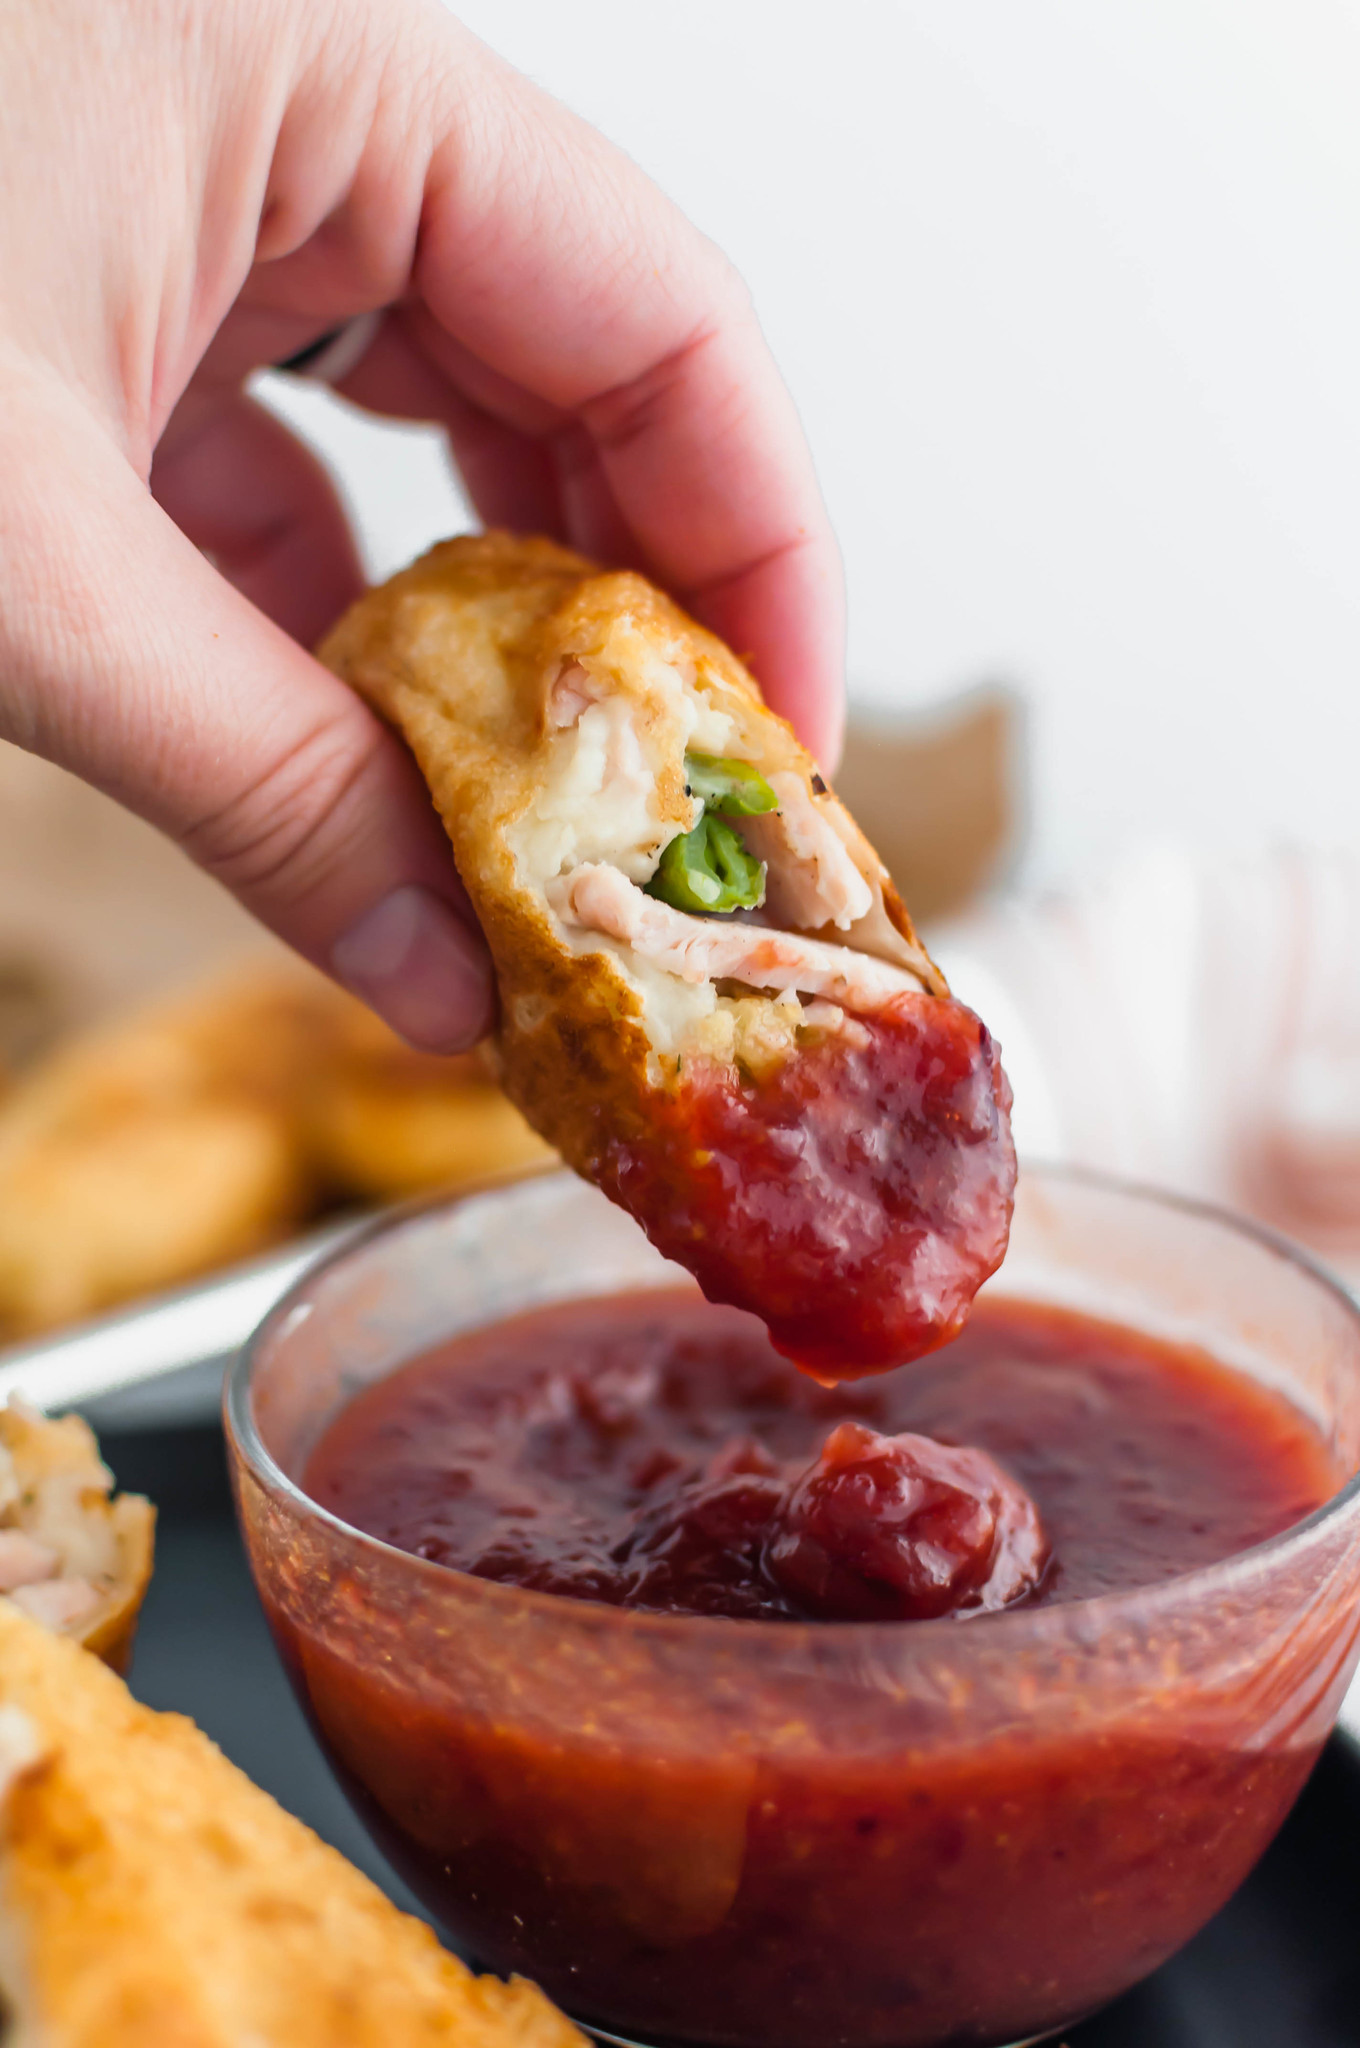 Don't just reheat your Thanksgiving leftovers this year. Instead, use them to make Thanksgiving Egg Rolls. Stuffed with juicy turkey and all the classic sides.